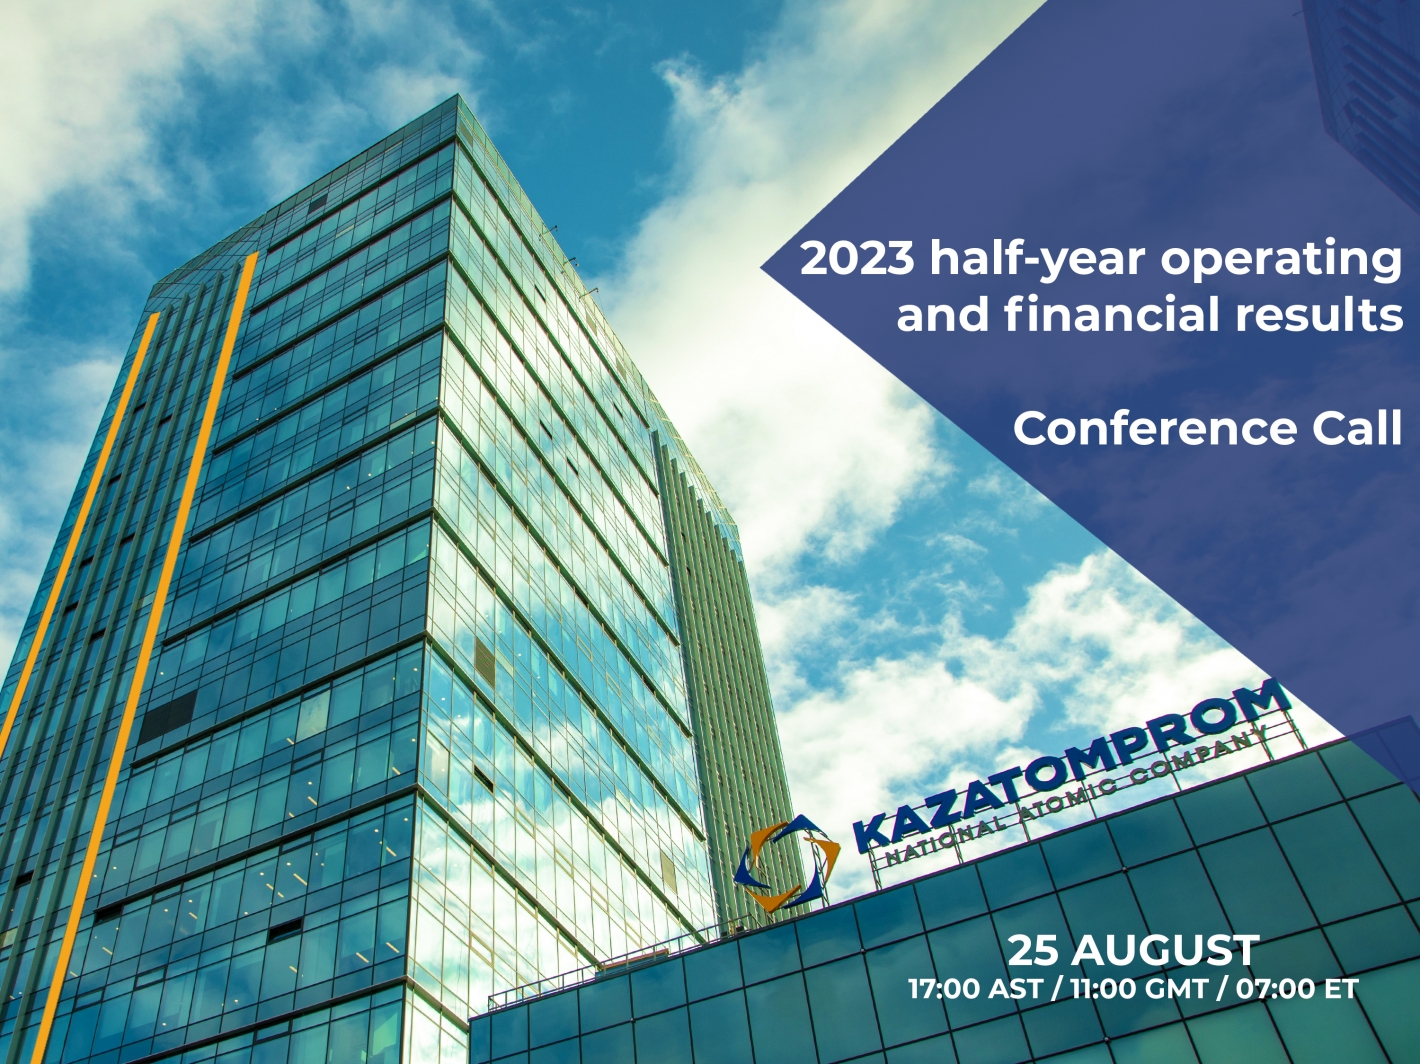 Timing of Kazatomprom 2023 Half-Year Results and Conference Call